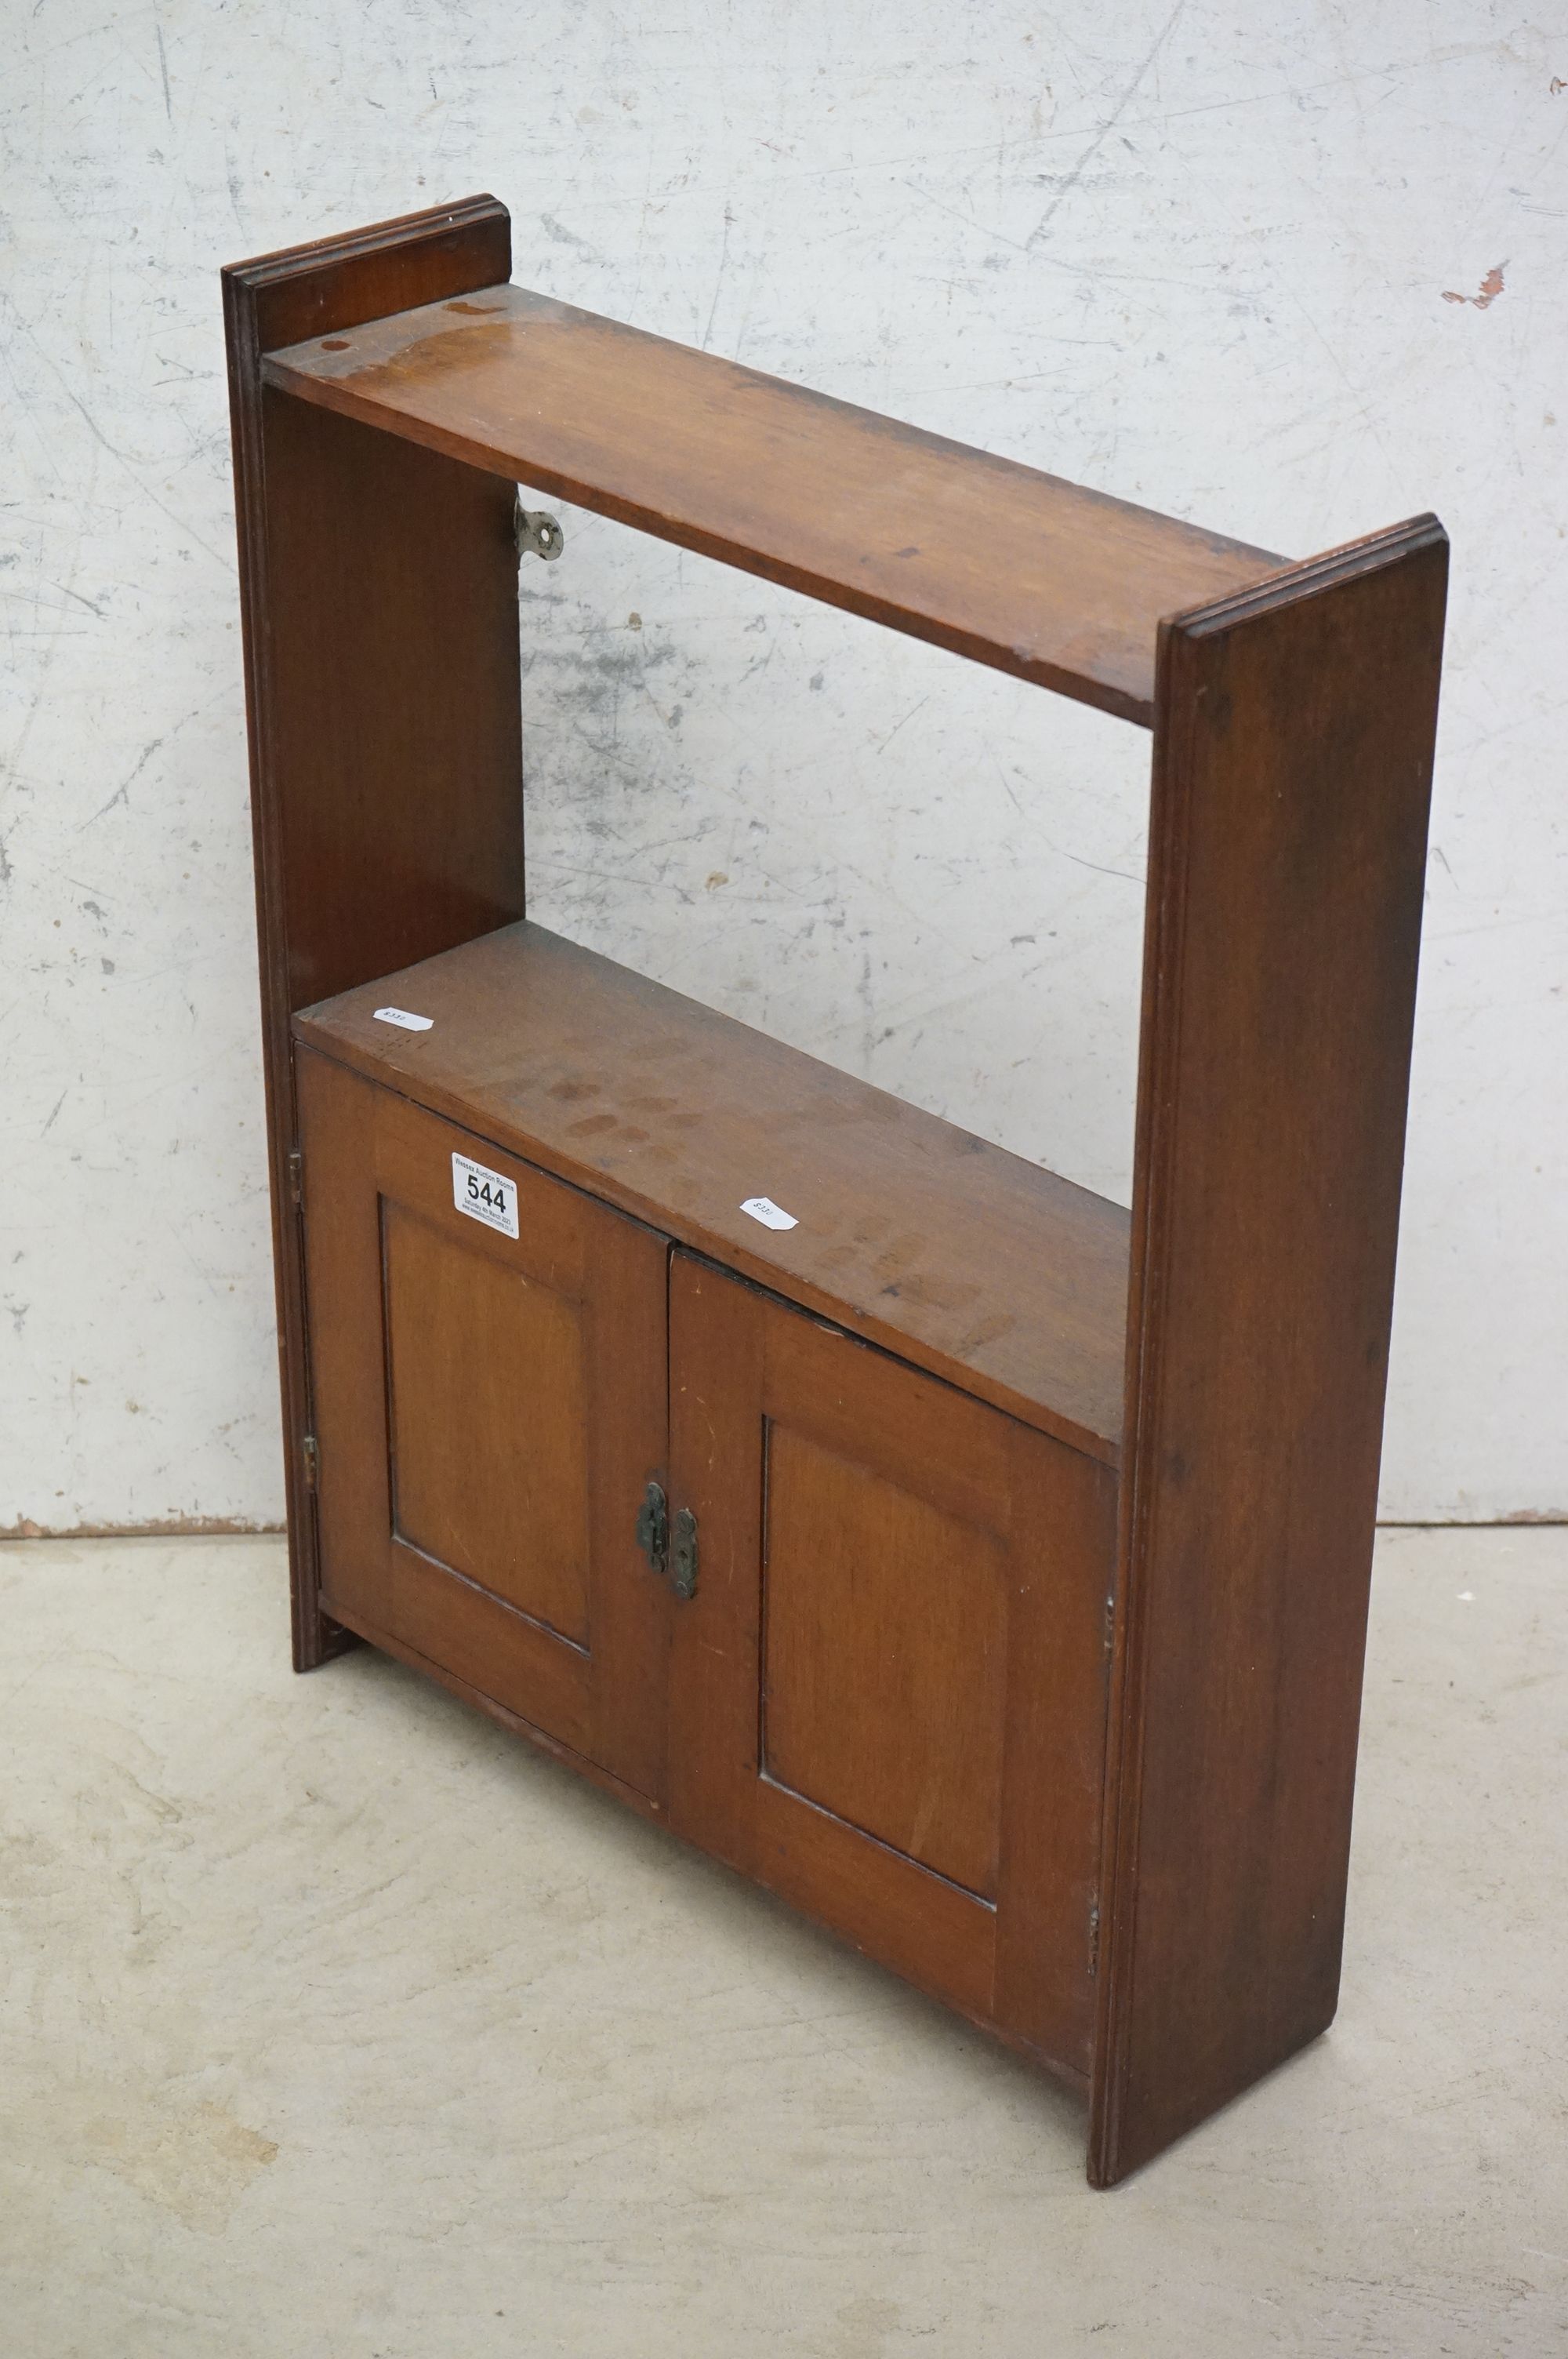 19th / Early 20th century Mahogany Hanging Wall Shelf and Cupboard, 48cm wide x 63cm high - Image 3 of 6